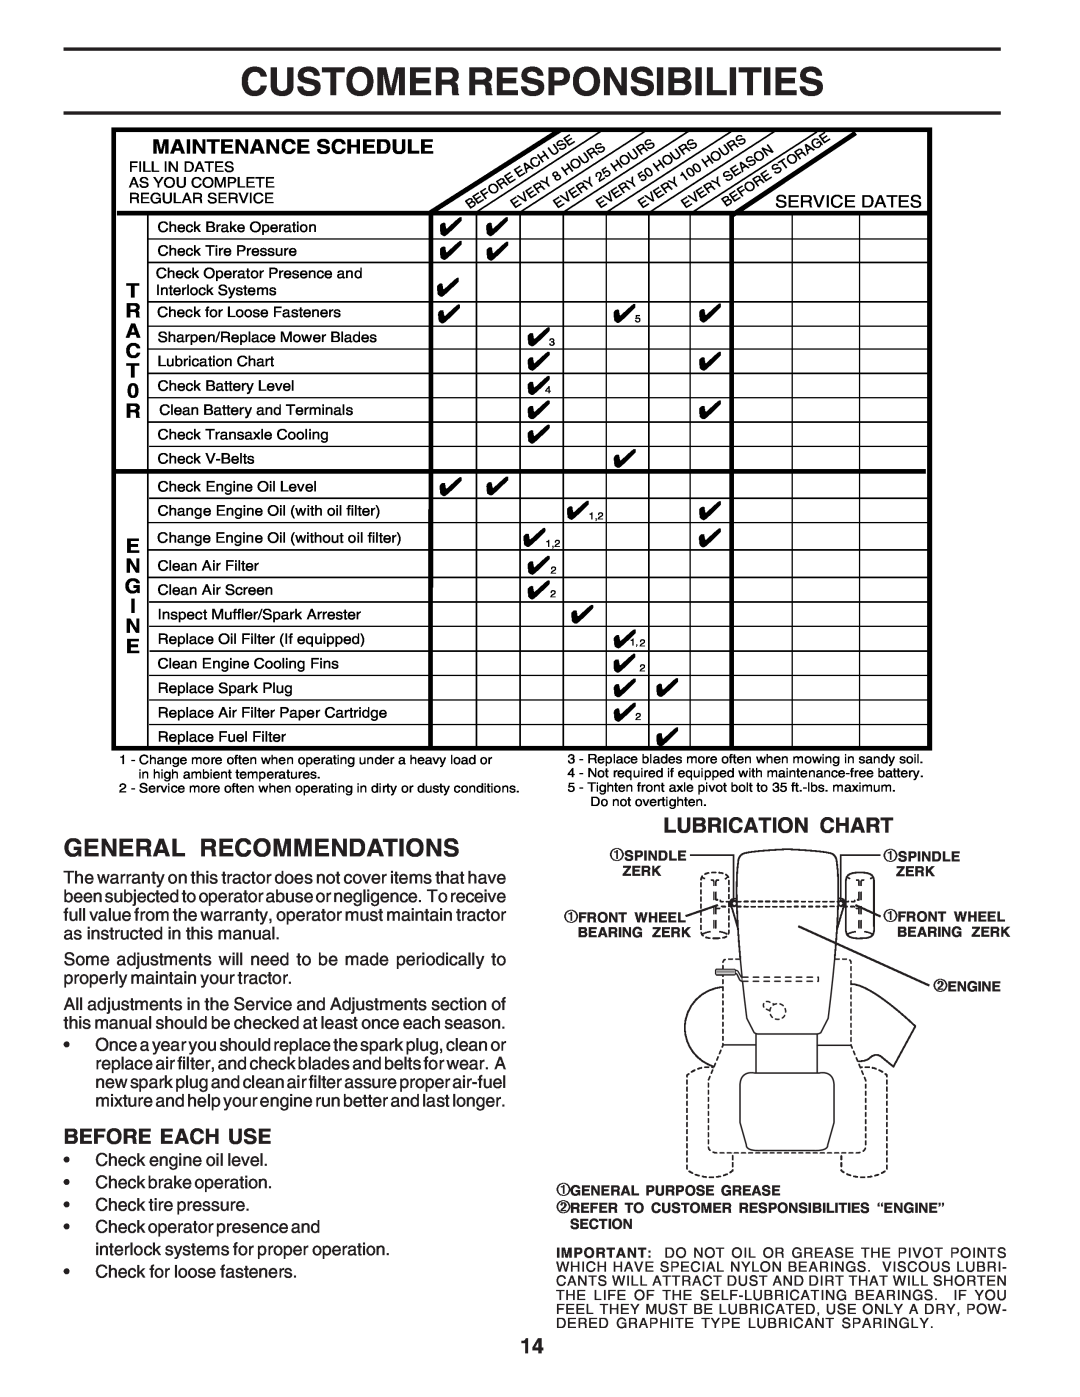 Poulan PC1538B manual Customer Responsibilities, General Recommendations, Before Each Use, Lubrication Chart 